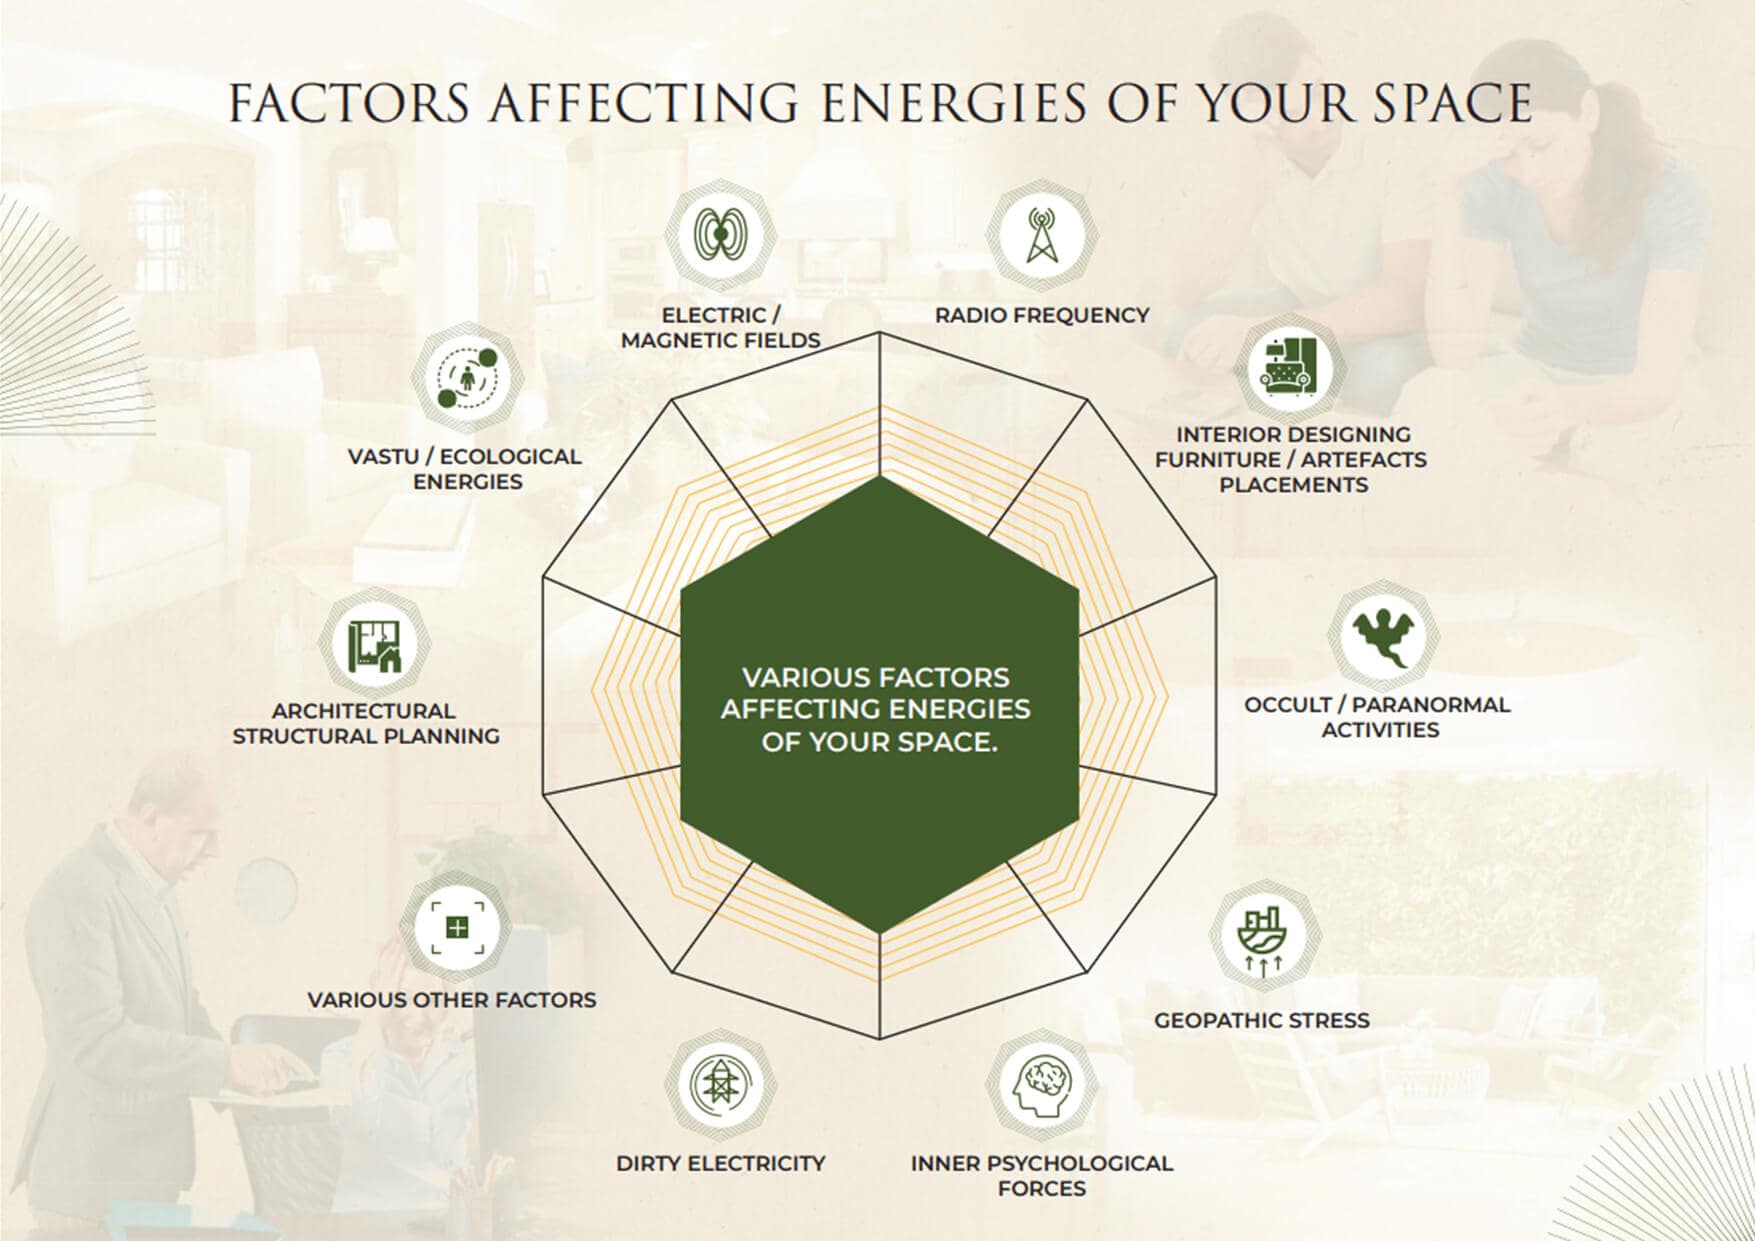 Company Factors Affecting Energies Of Your Space